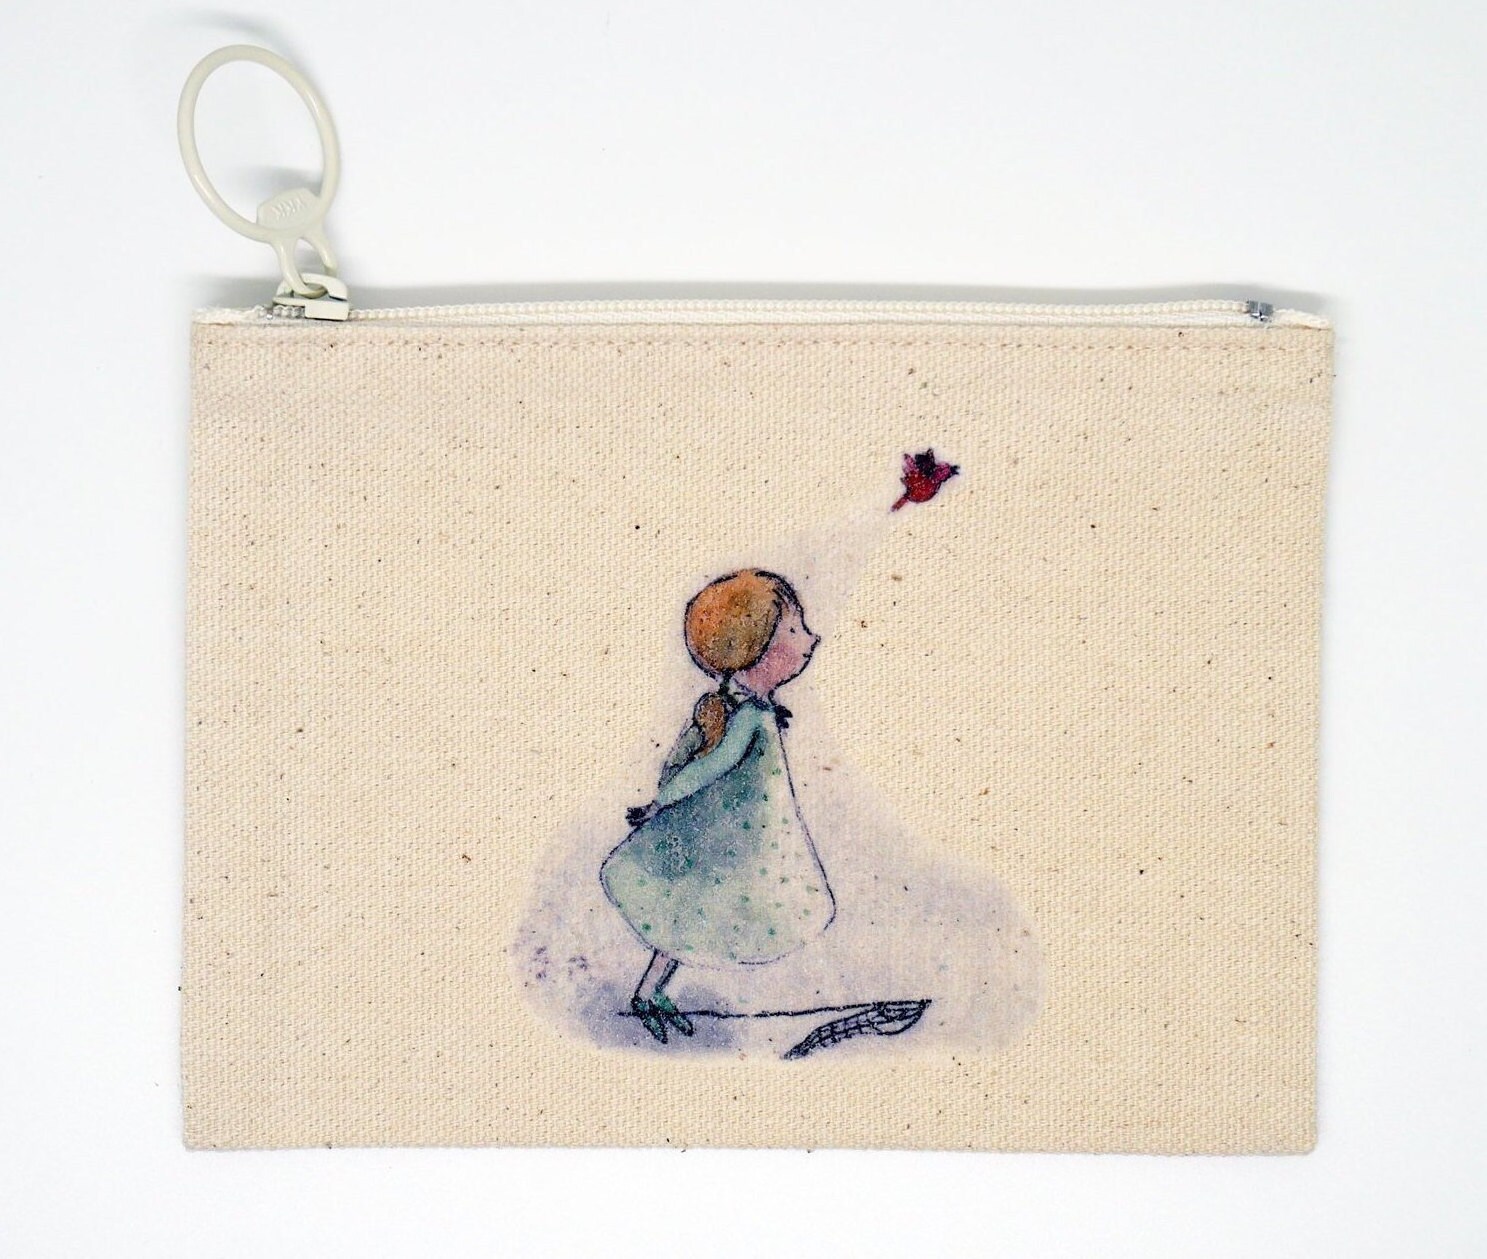 Watercolor & Ink Illustration Printed Small Canvas Pouch, Coin Pouch